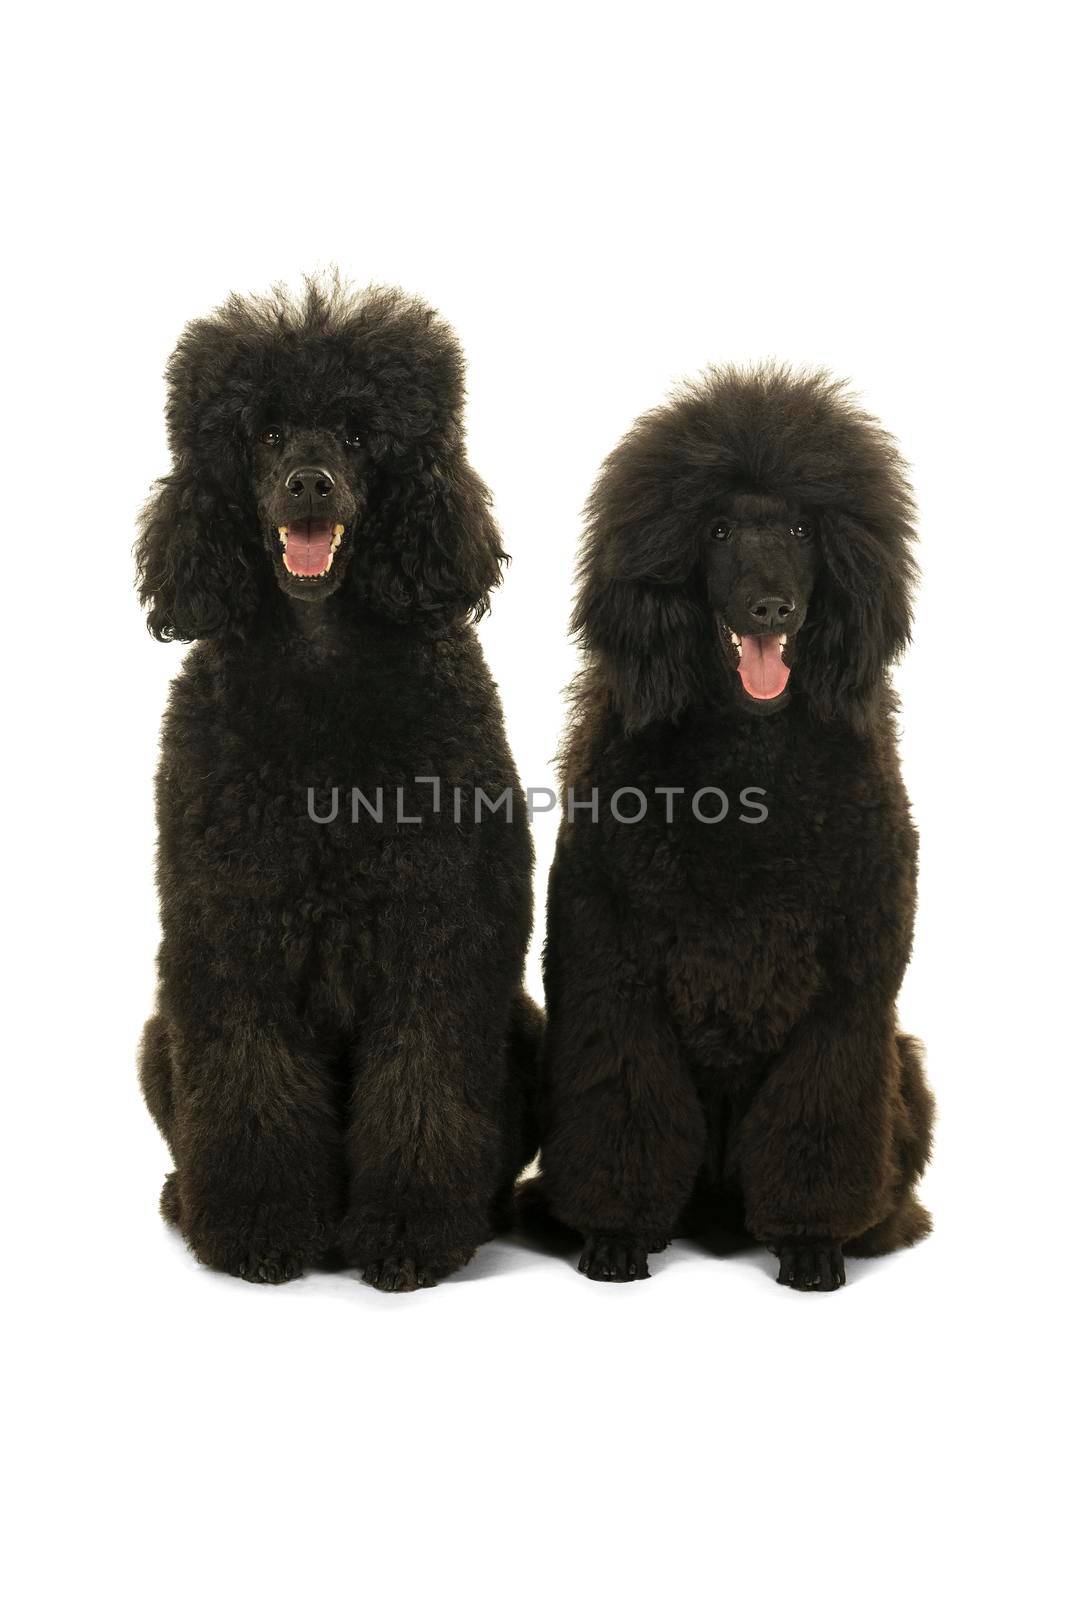 Two black king poodles isolated in white